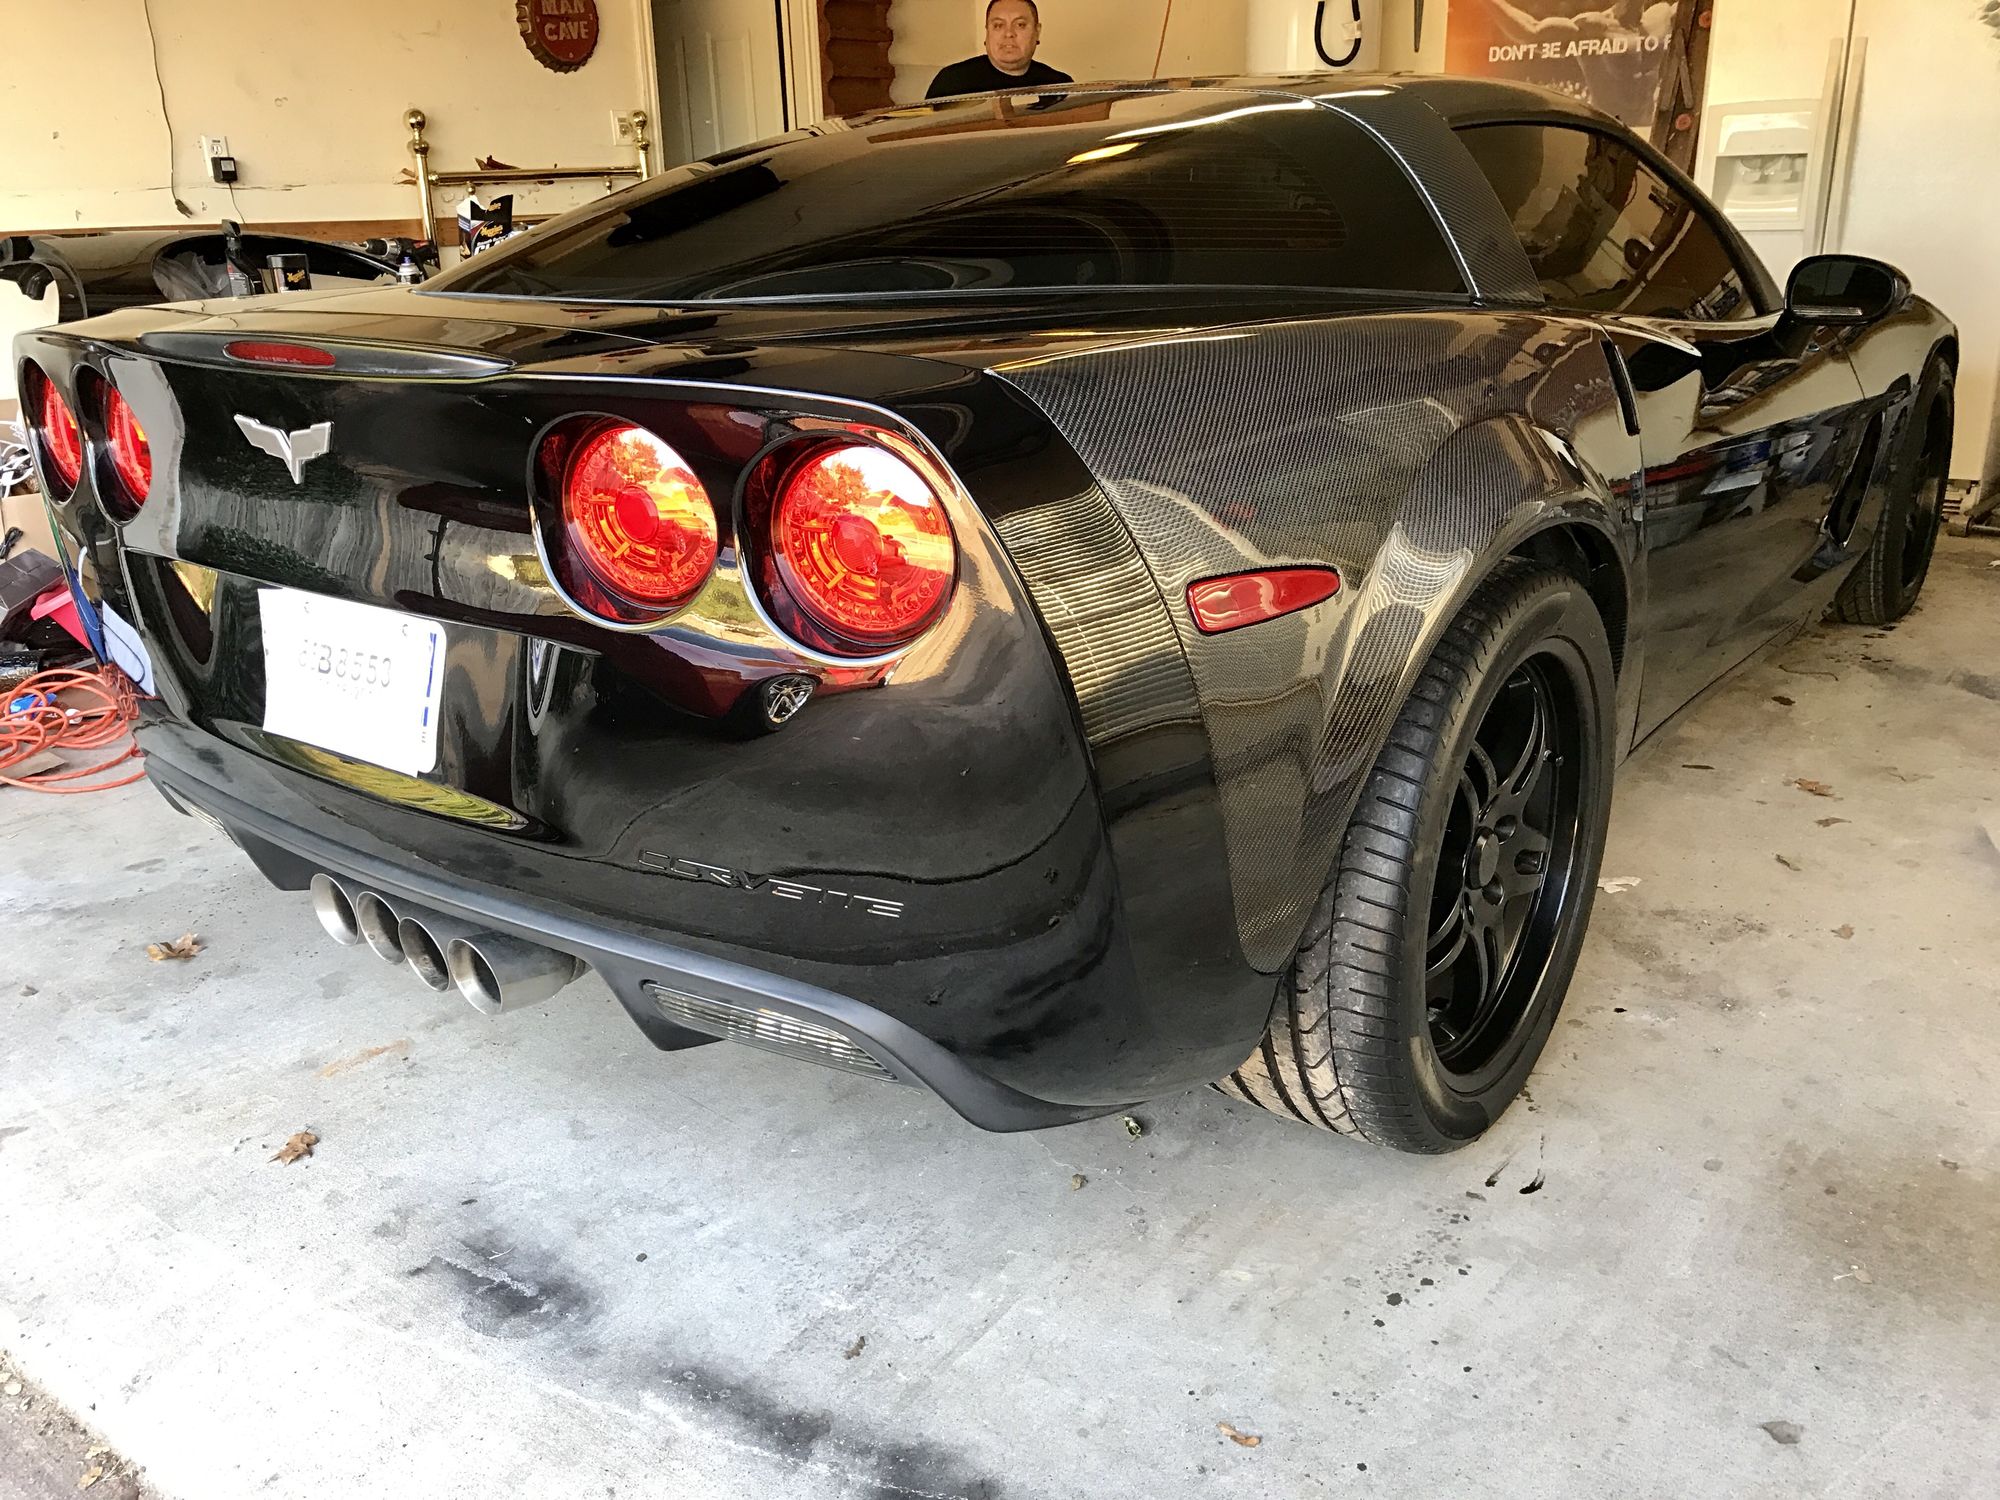 C6 Corvette Fender Flares - A Flare Of The Dramatic